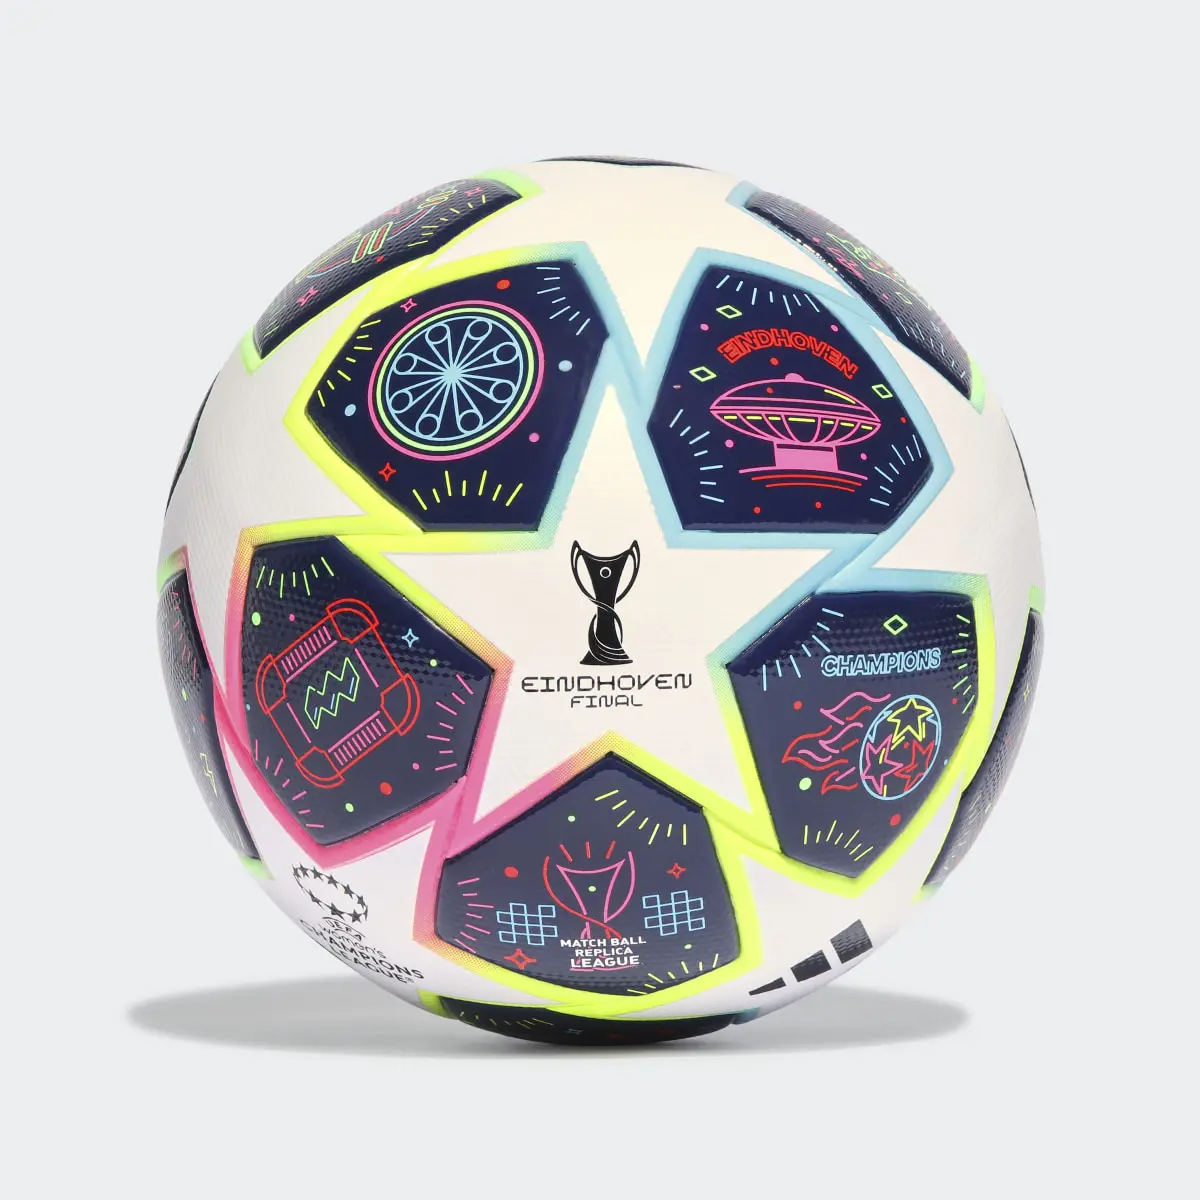 Adidas UWCL League Eindhoven Ball. 2